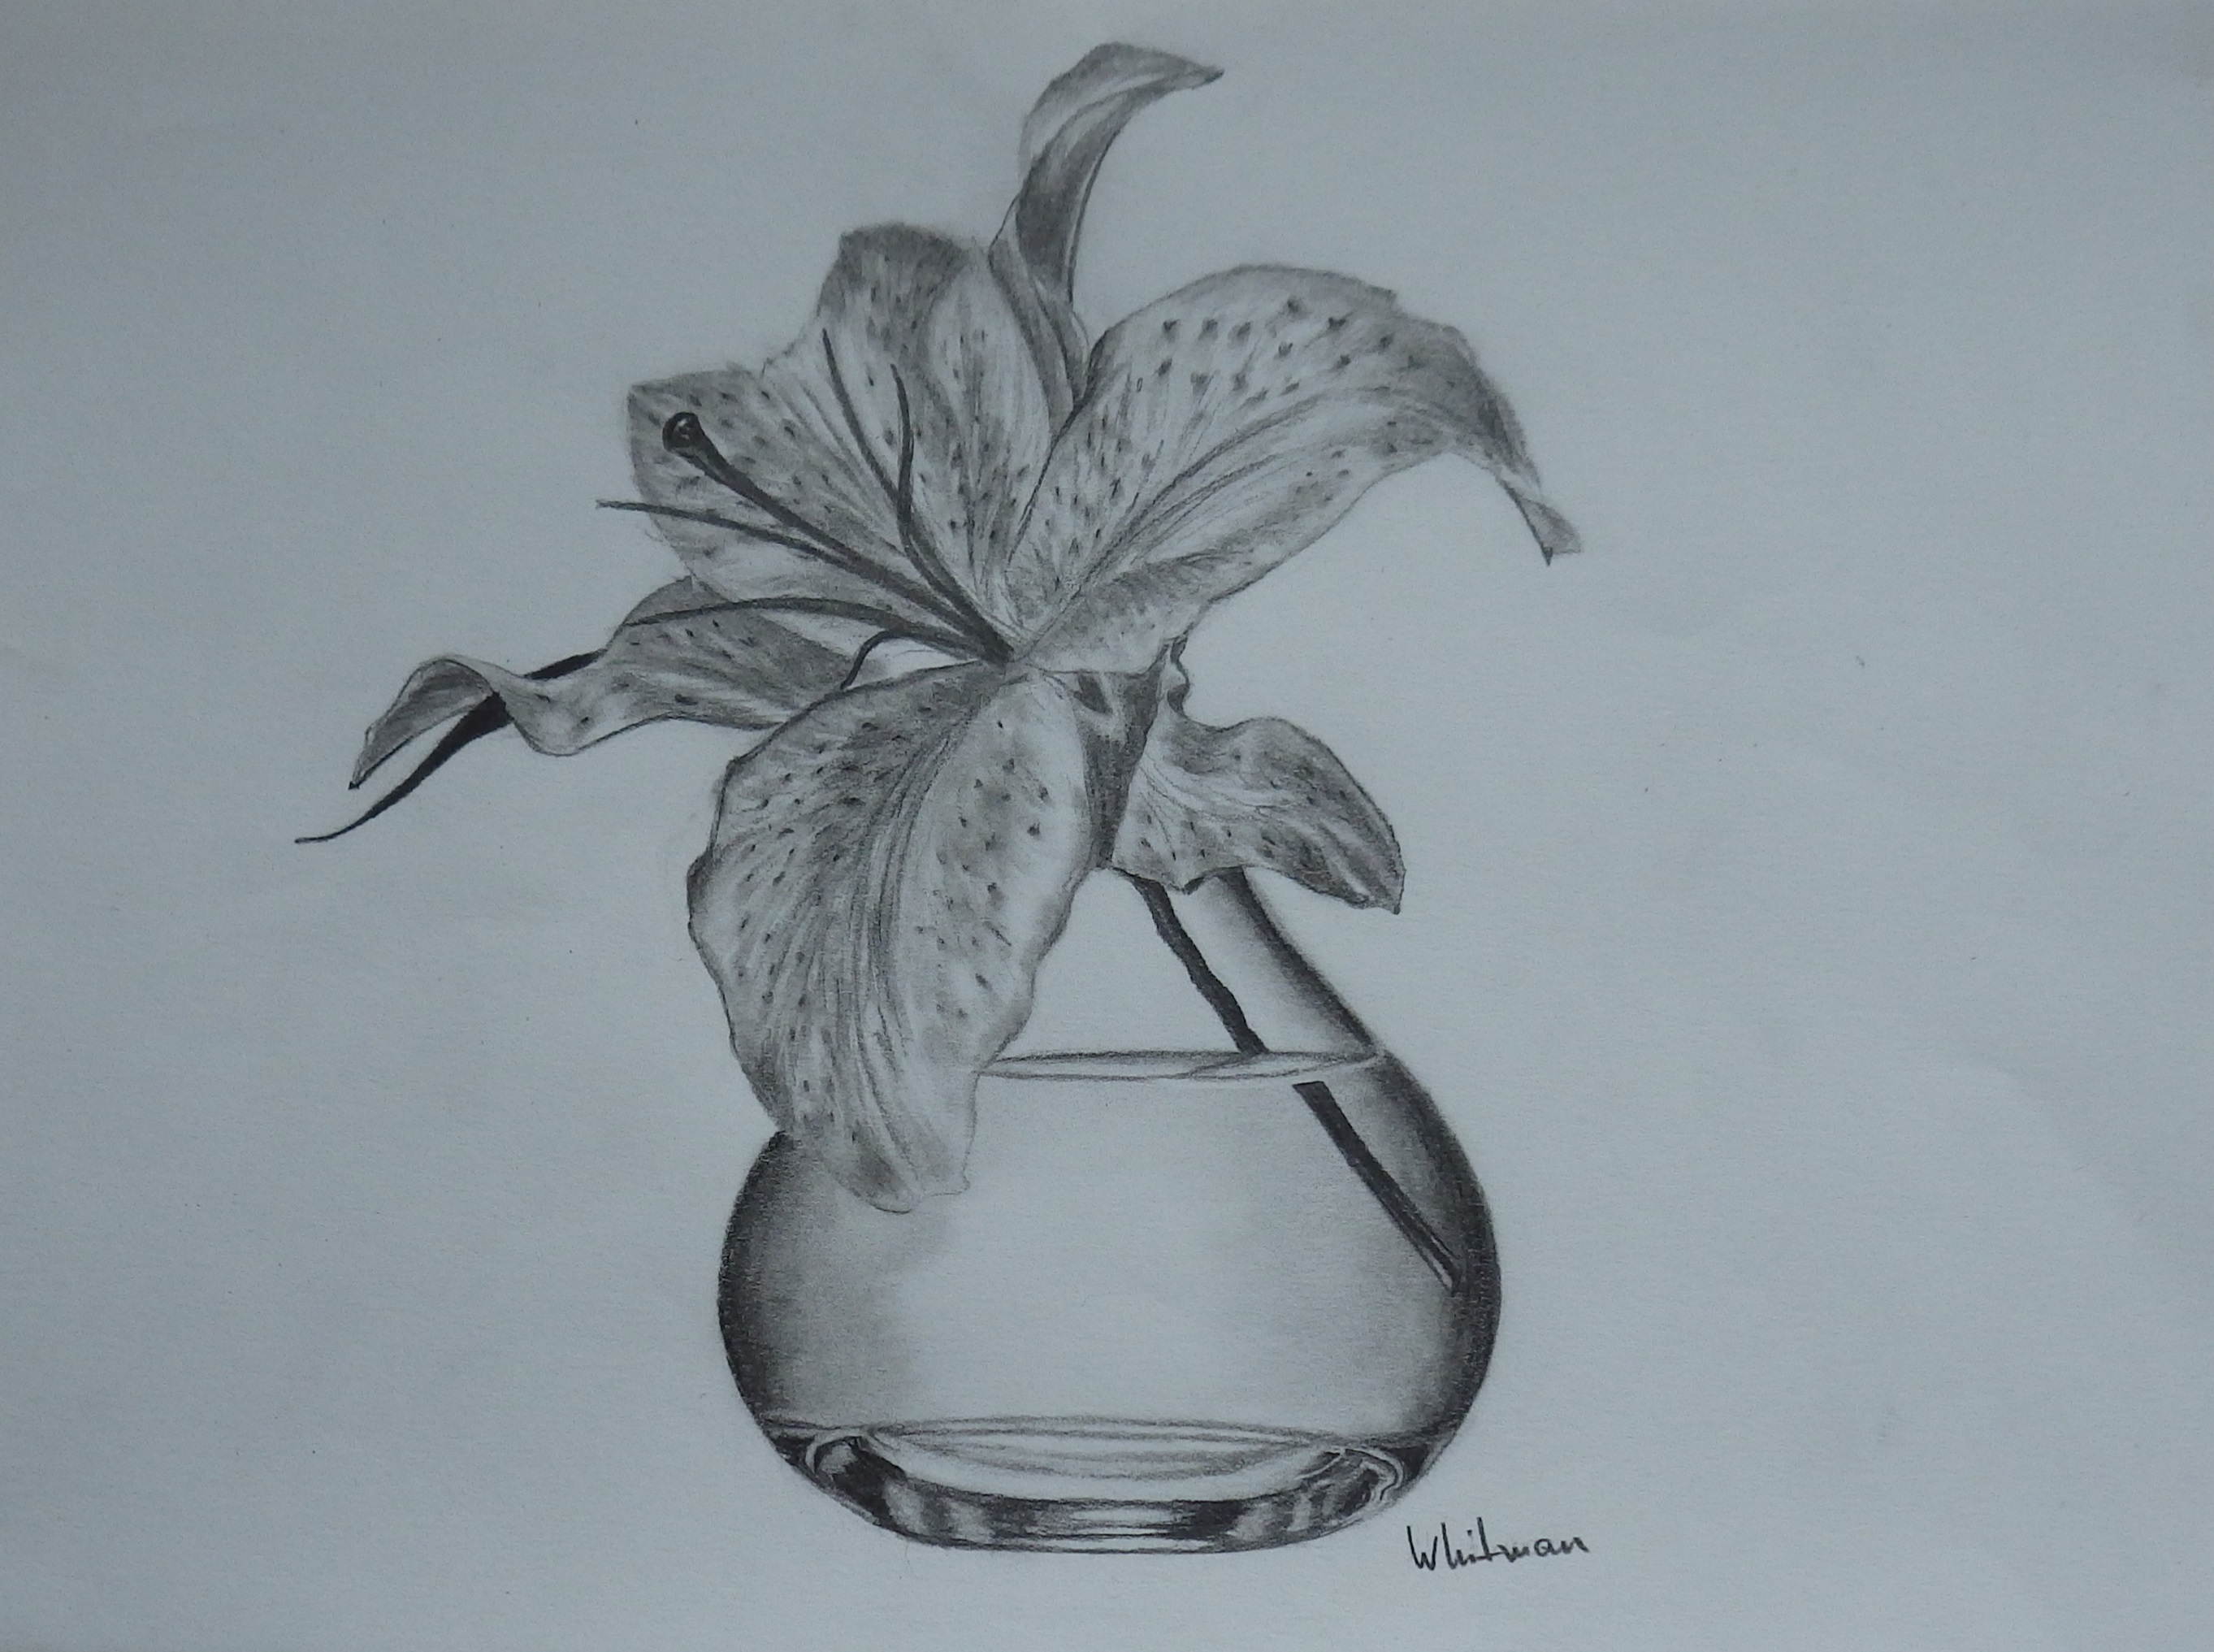 Vase With Flower Drawing at GetDrawings | Free download